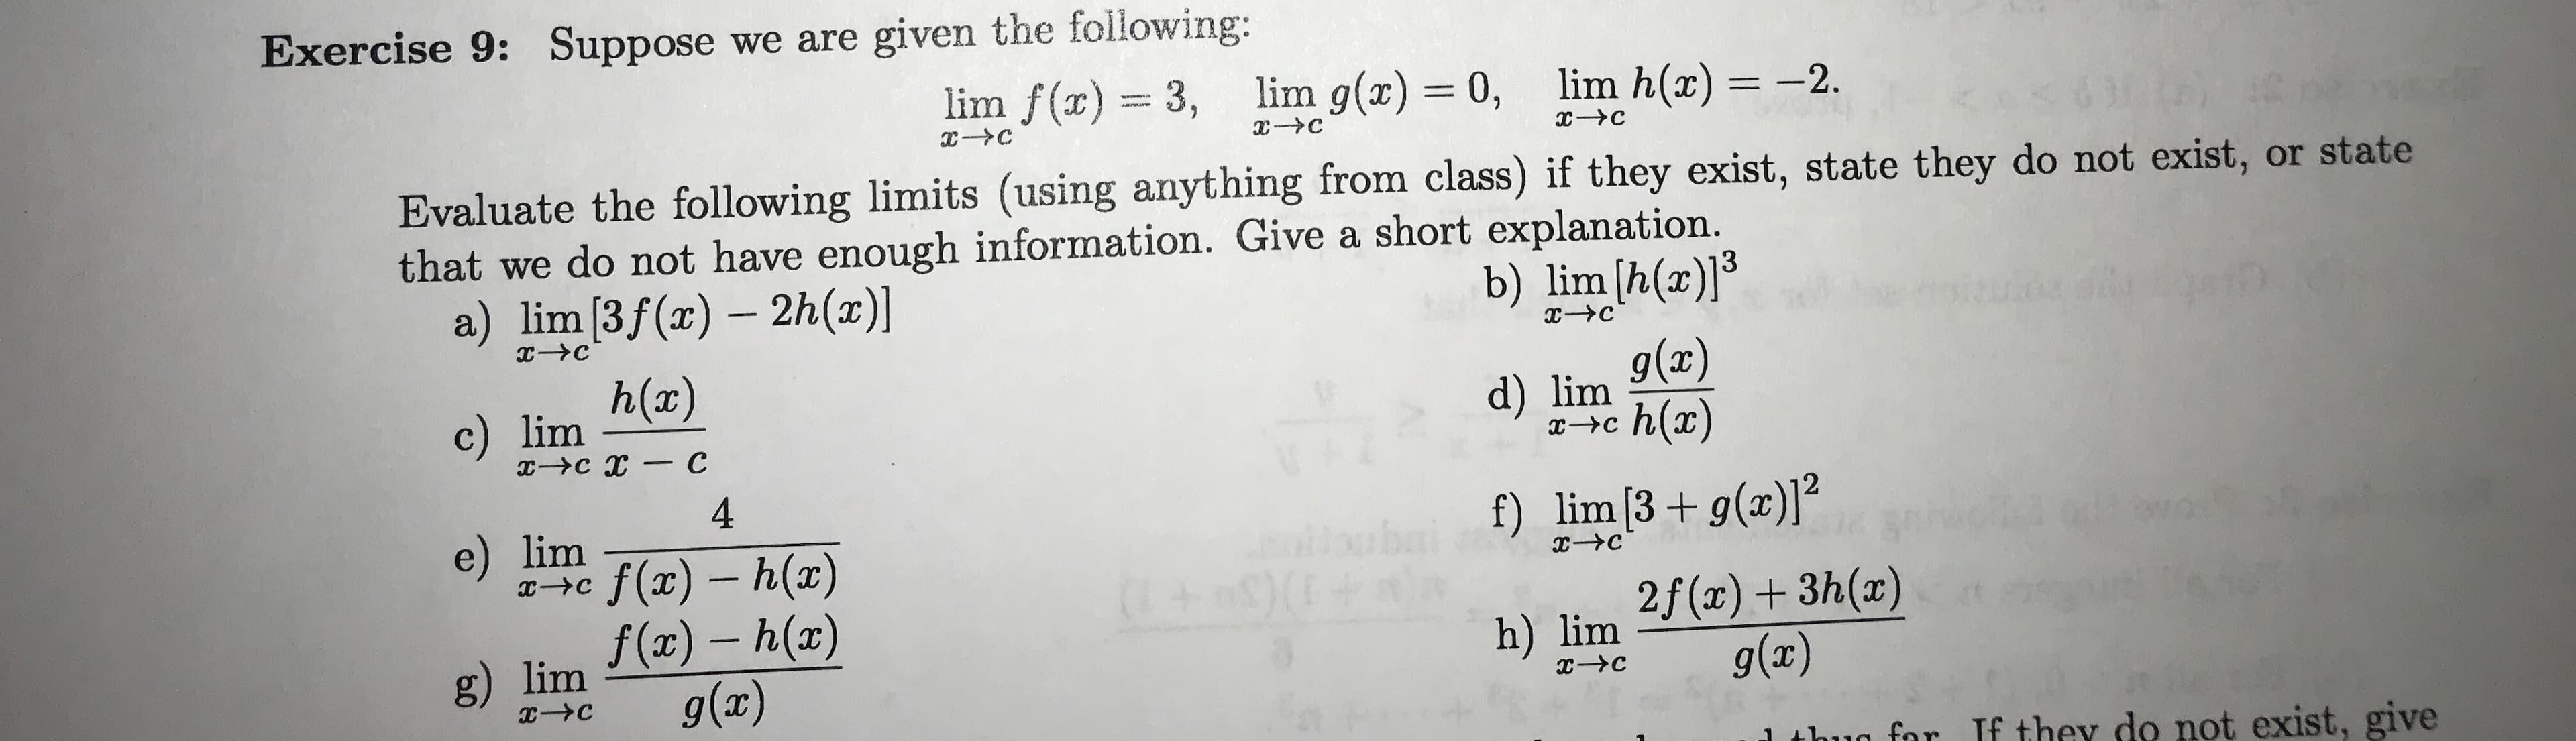 Exercise 9: Suppose we are given the following:
lim f(x)3,
lim g(x) 0, lim h(x) -2
C
C
Evaluate the following limits (using anything from class) if they exist, state they do not exist, or state
that we do not have enough information. Give a short explanation.
a) lim [3f (x) 2h(x)]
b) lim [h(a)]
h(x)
g(x)
d) lim
h(ar)
c) lim
-Ус х — С
4
f) lim [3g(x)]
e) lim
ilbuba
(+ 9 0
f(x) h(a)
f(ar)-h(ar)
g(x)
C
IXC
2f(x)3h(a)
g(x)
IX
h) lim
g) lim
с-Ус
x-C
for If they do not exist, give
